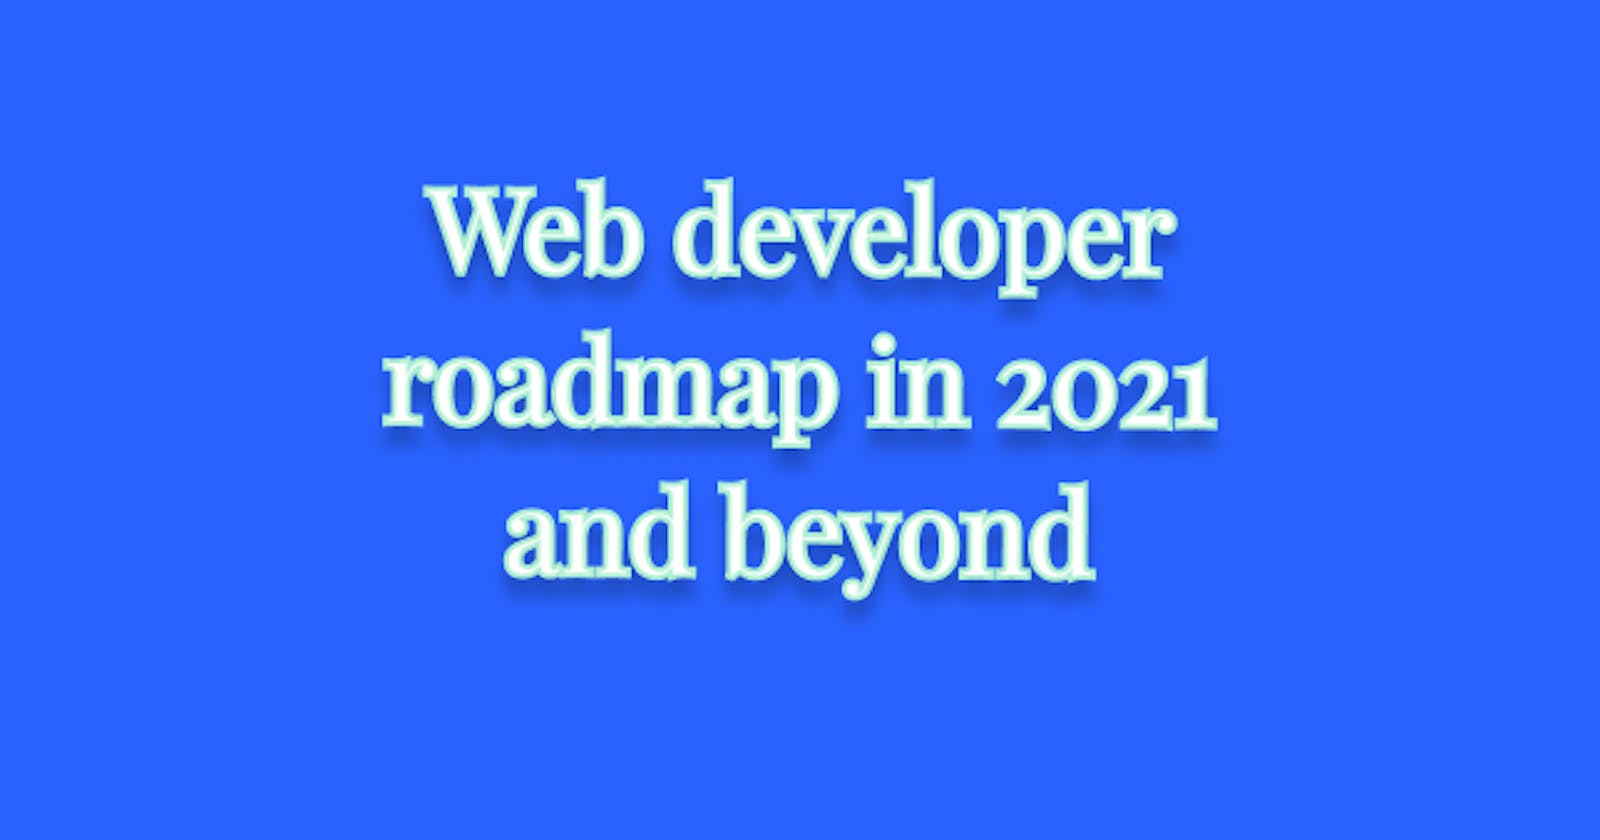 Complete web developer roadmap with resources for 2021